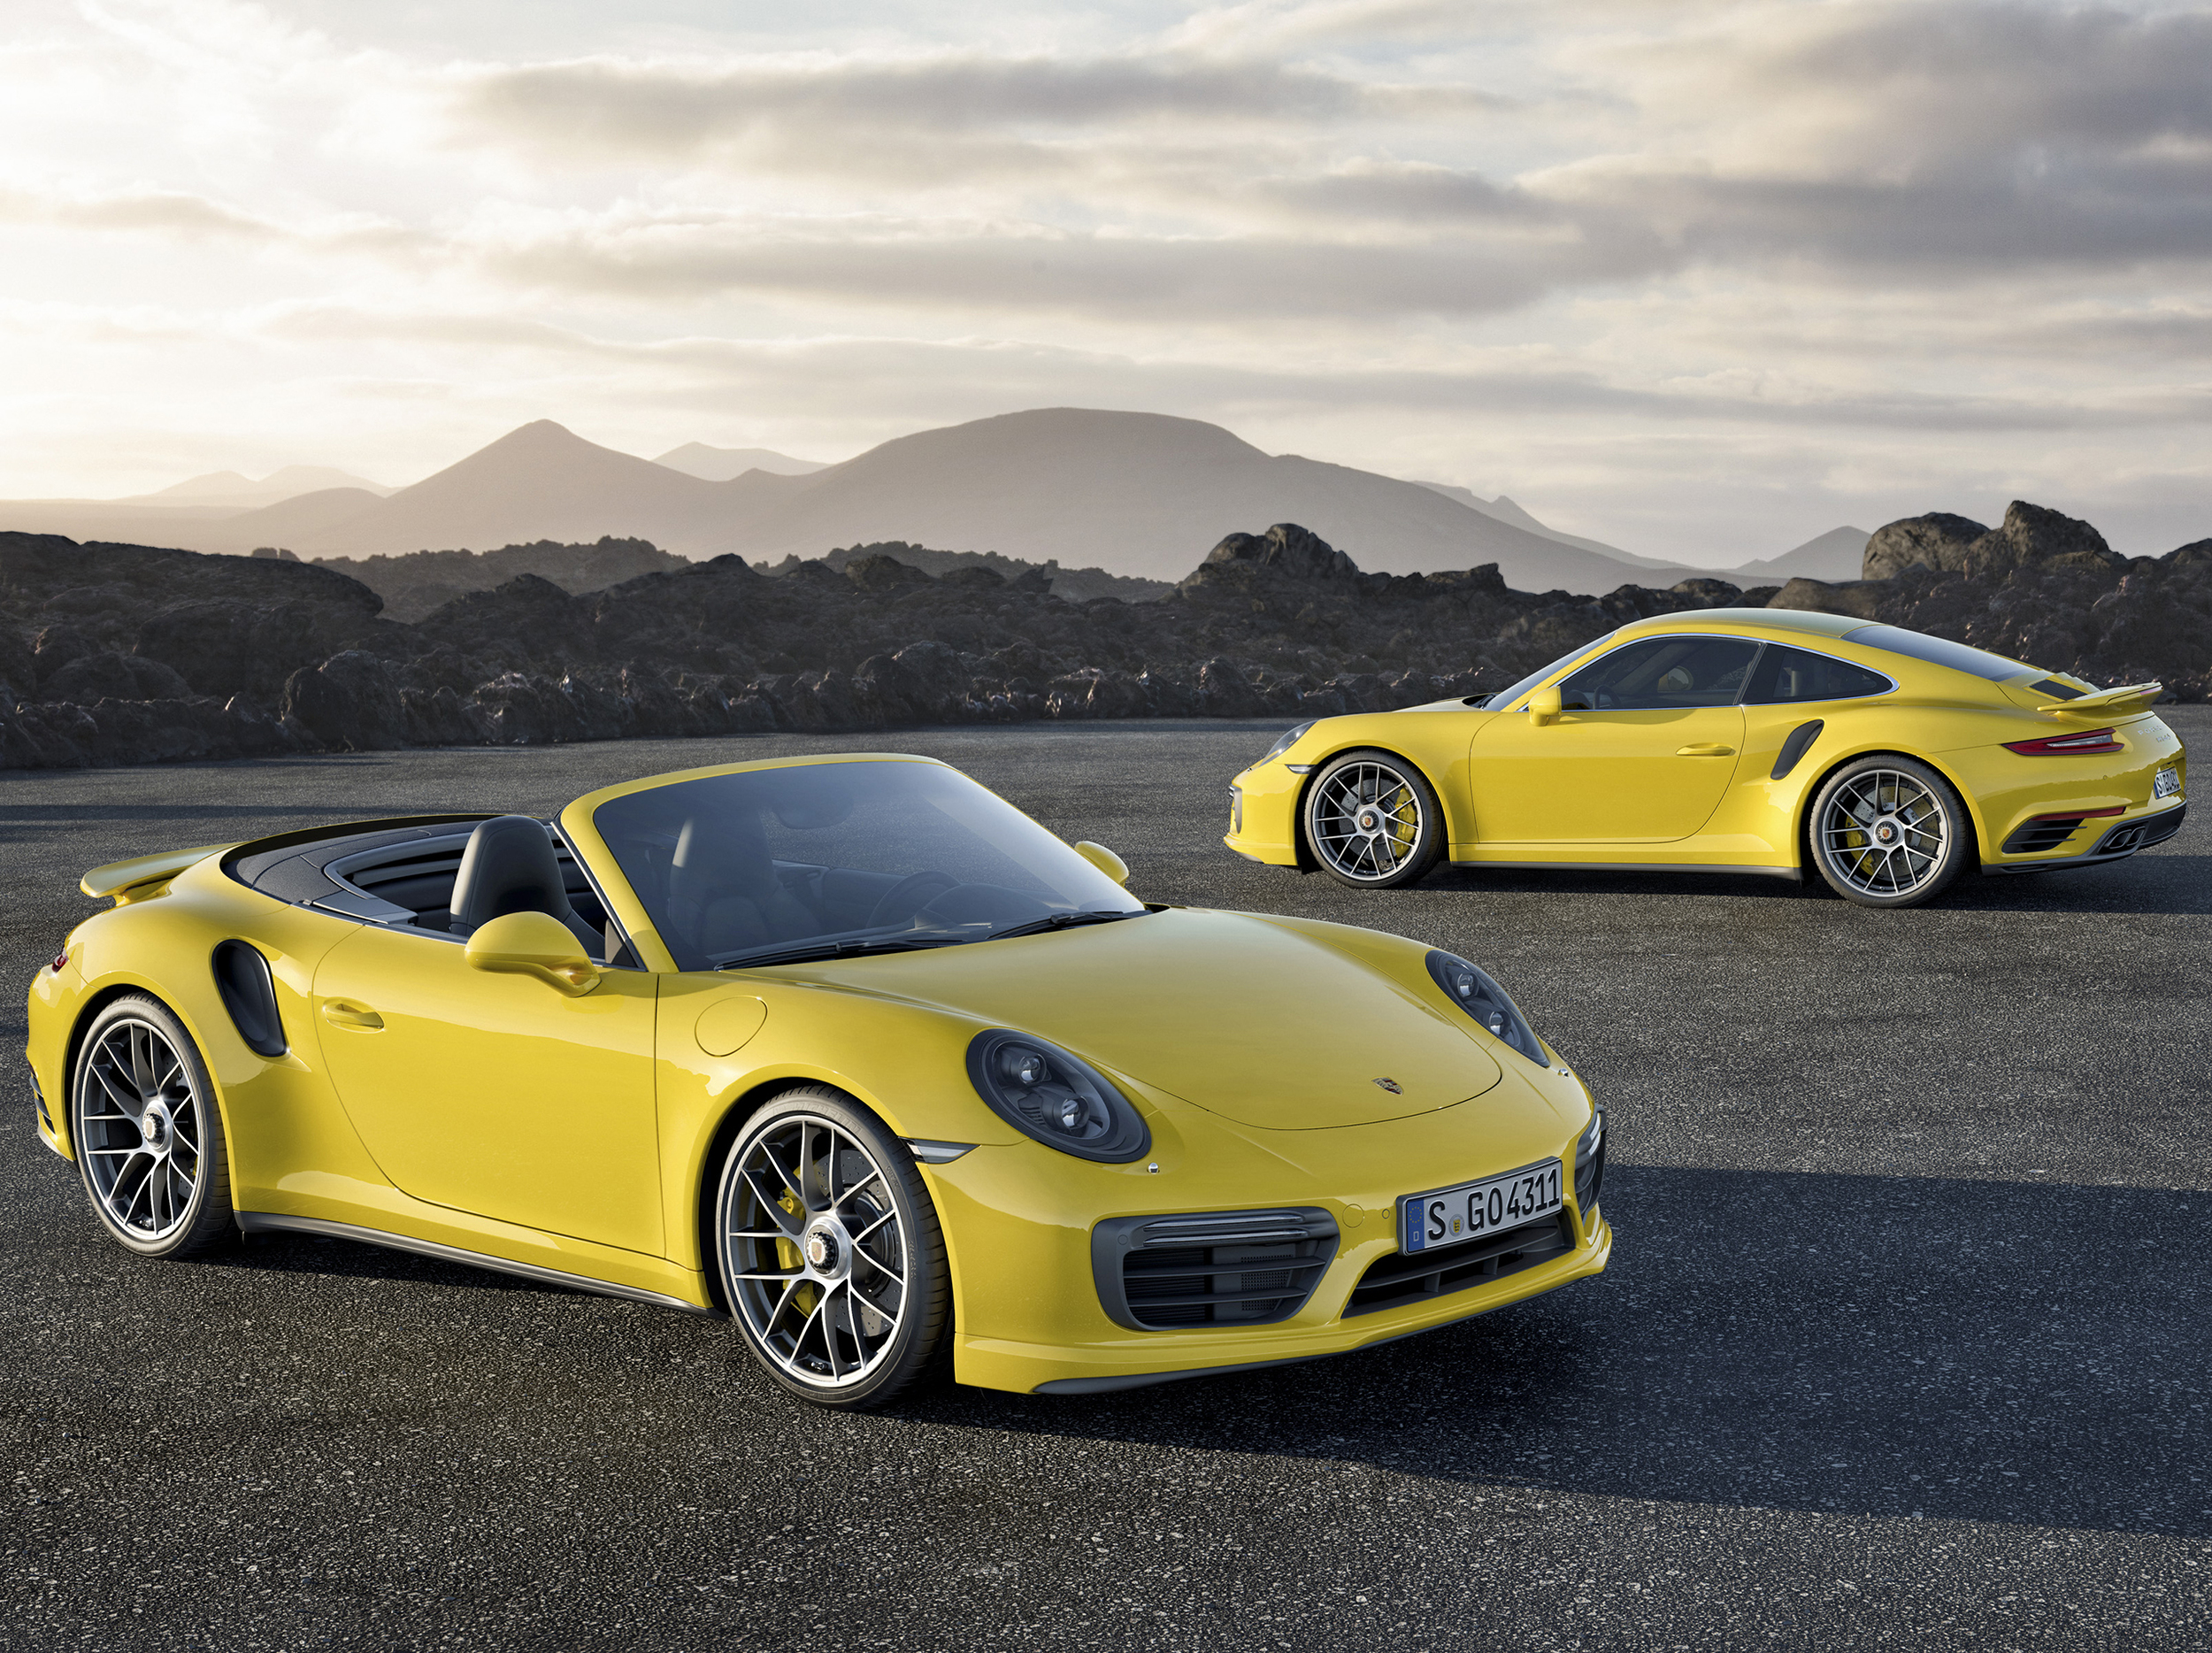 Facelifted Porsche 911 Turbo revealed